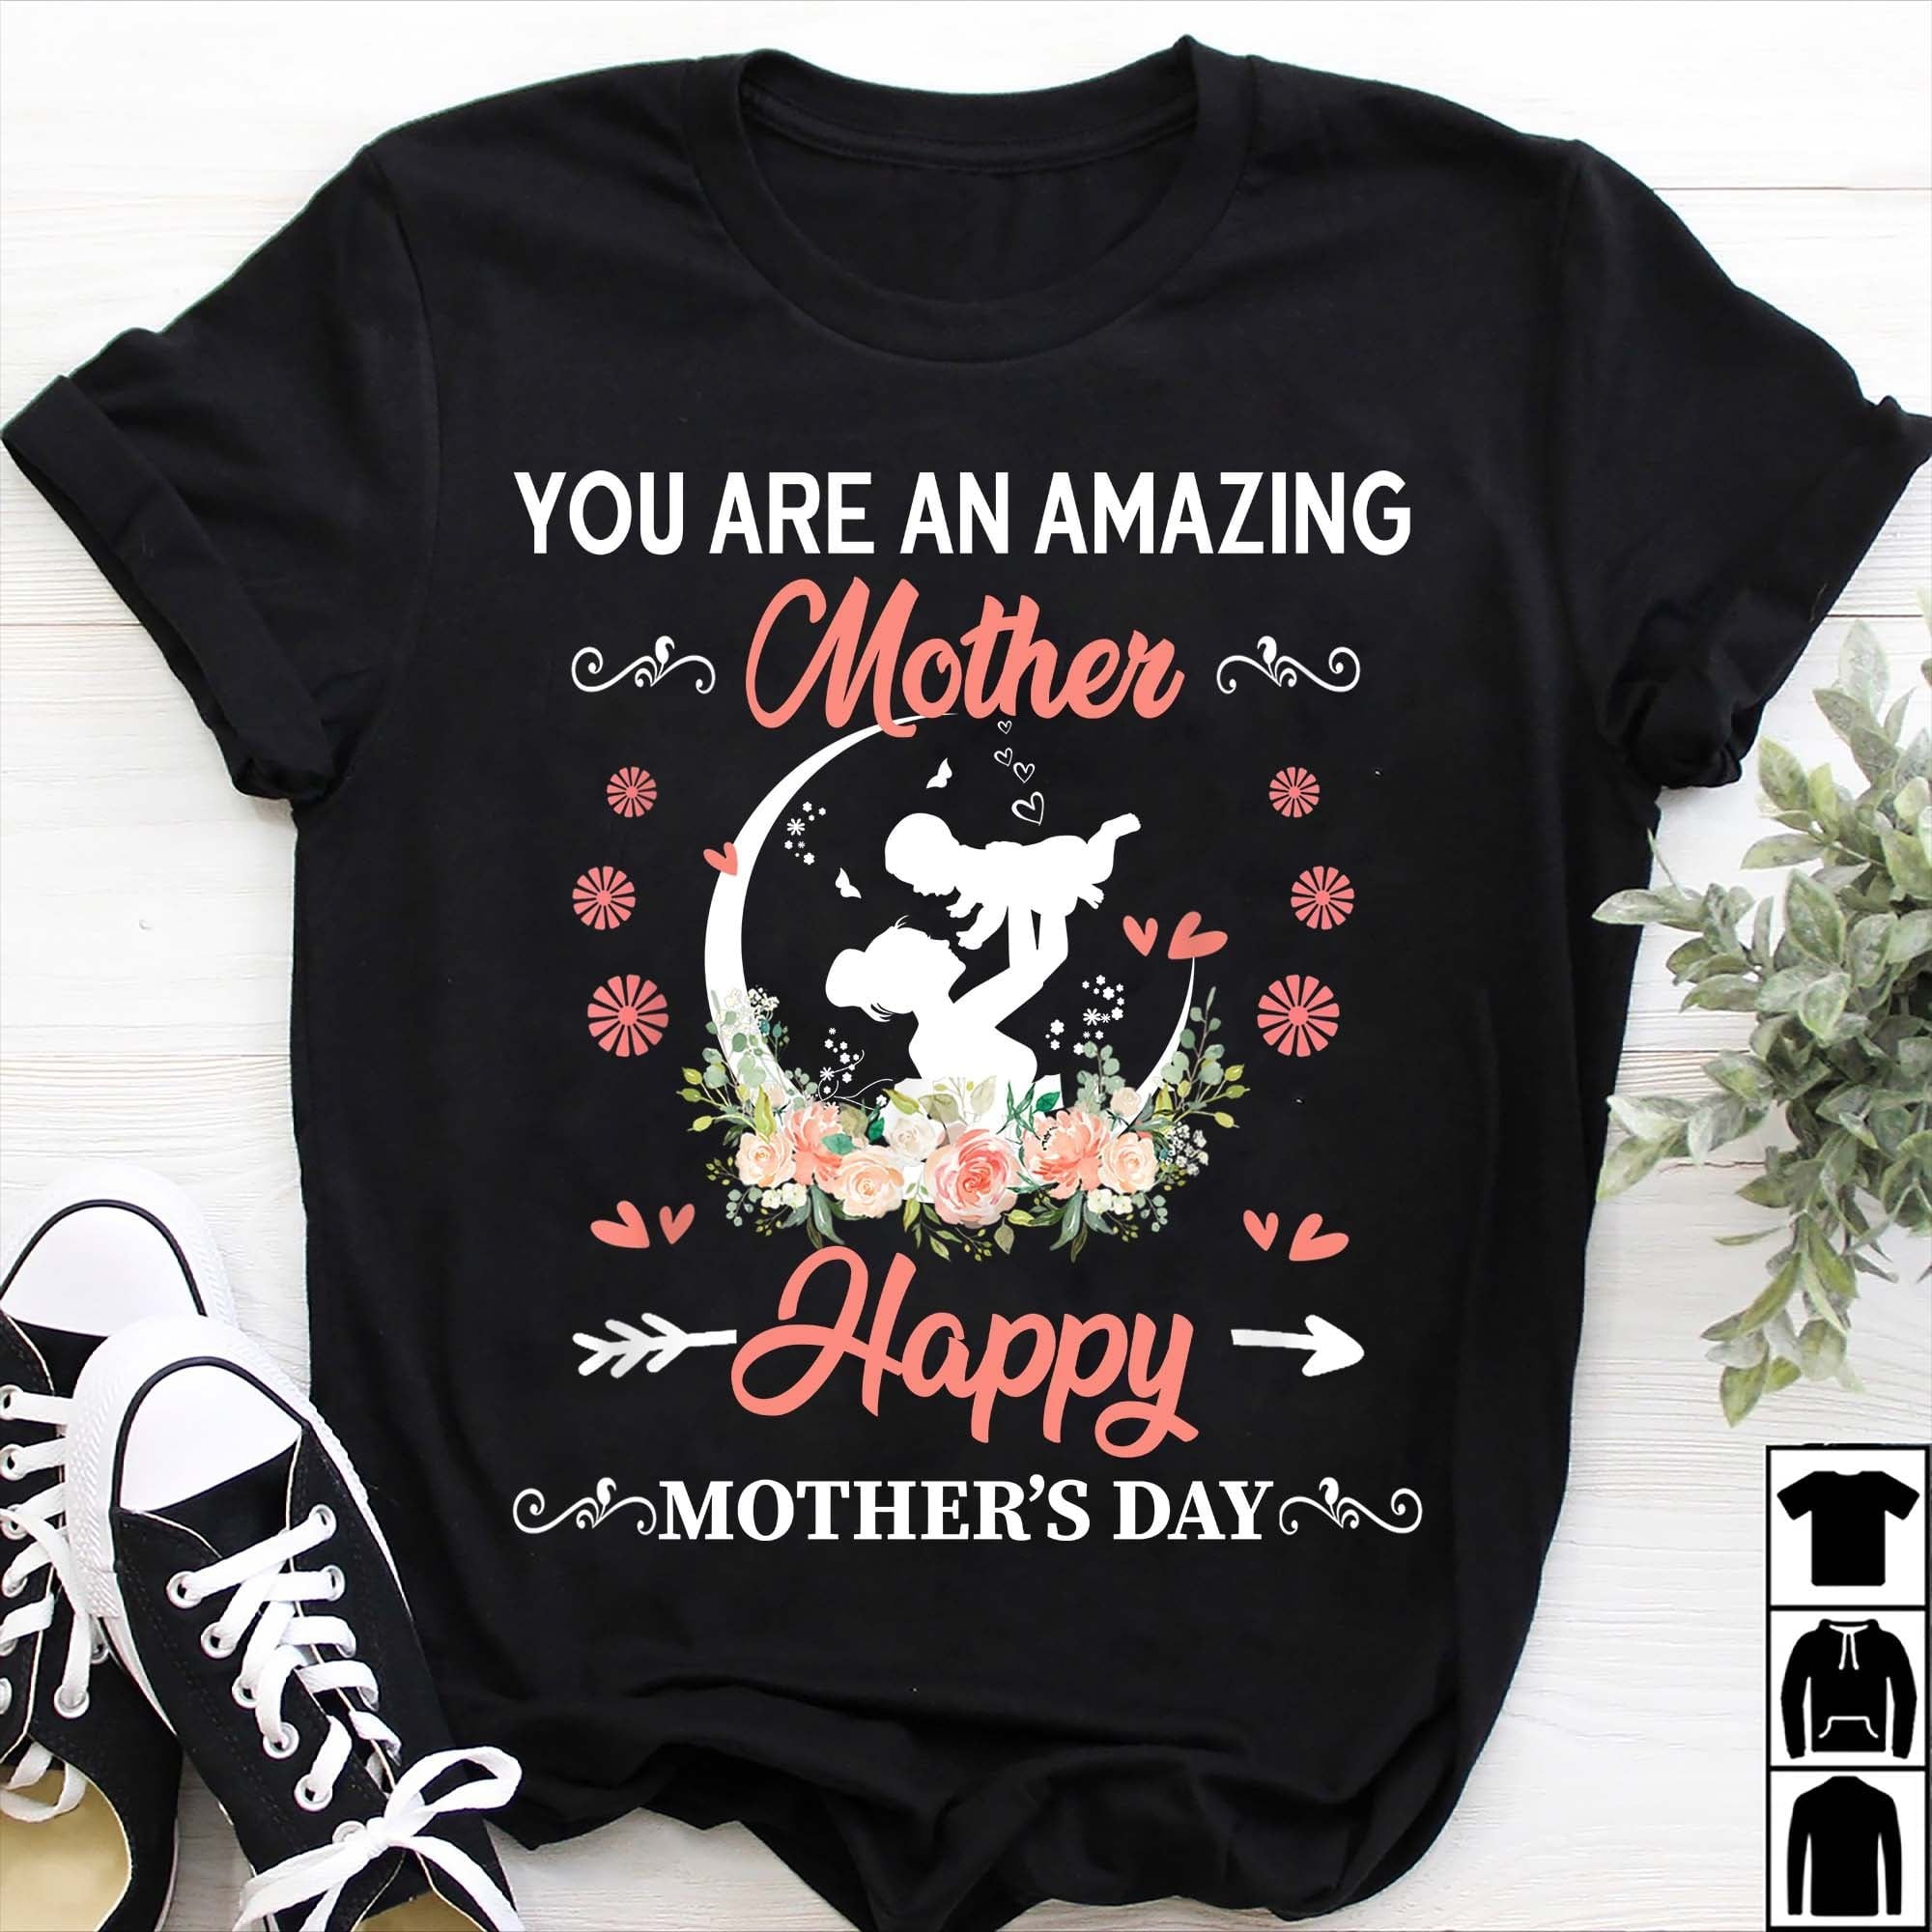 You are an amazing mother - Happy mother's day